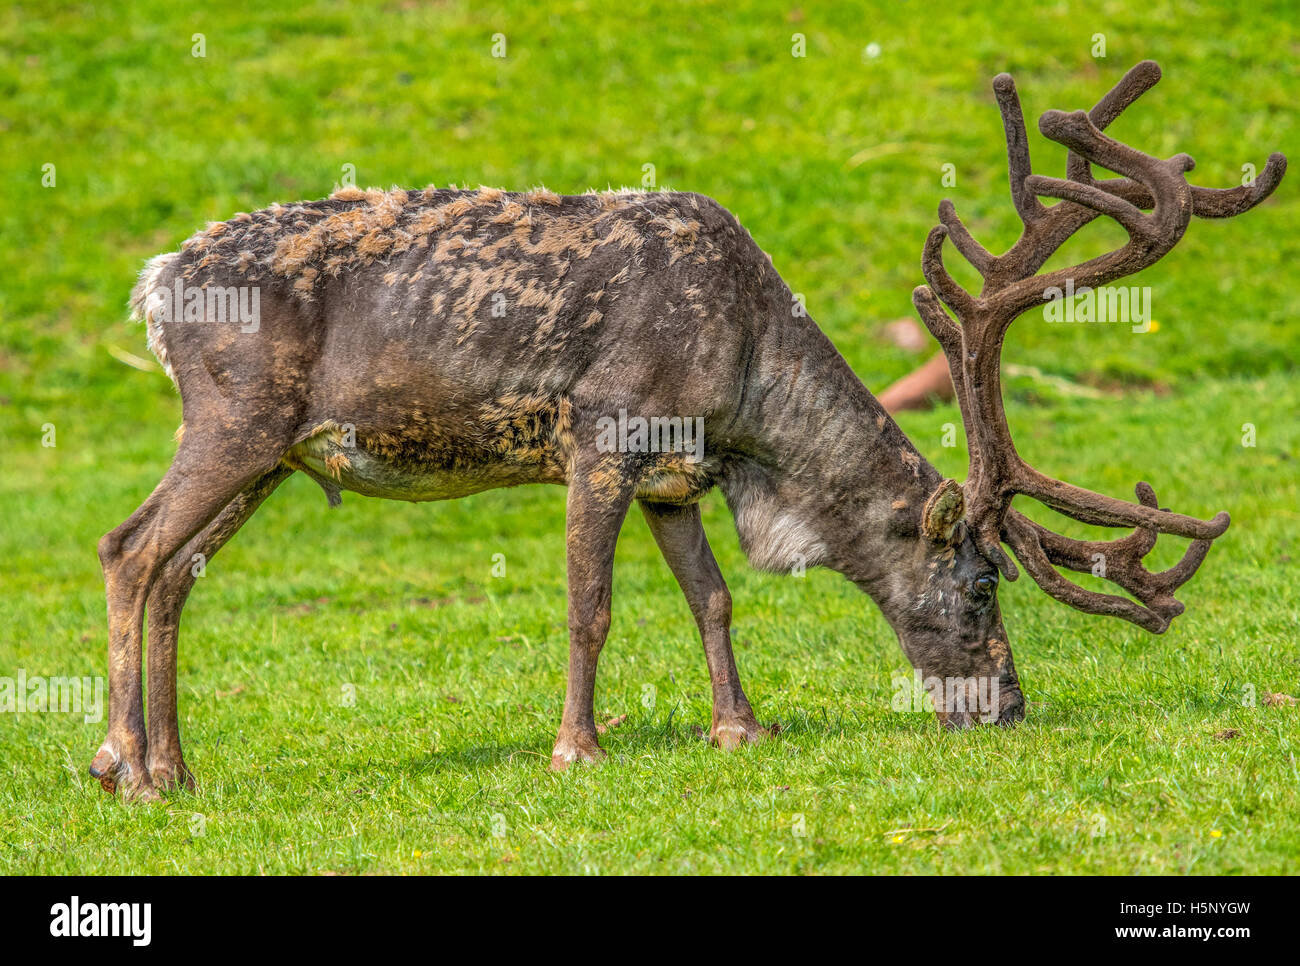 Reindeer feeding and still shedding its winter coat Stock Photo